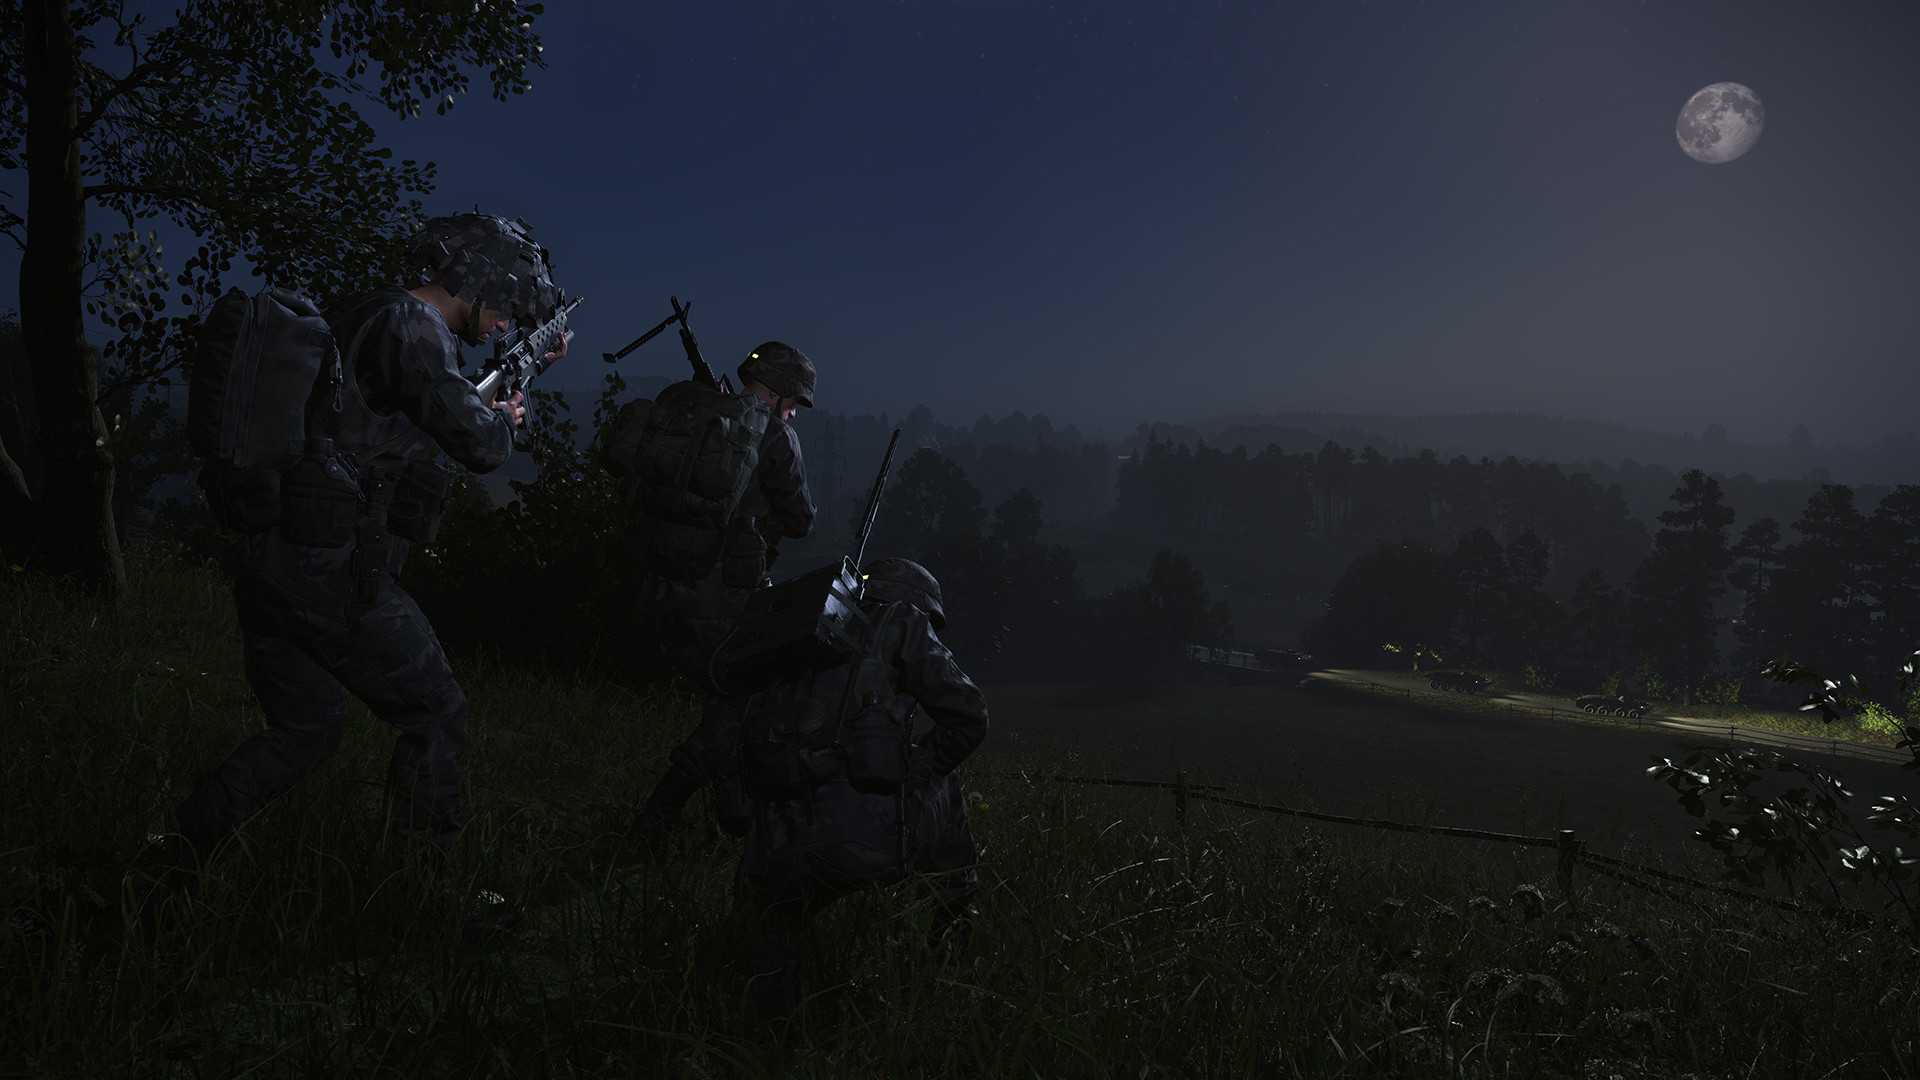 Arma 4 precursor Arma Reforger released in early access for PC and